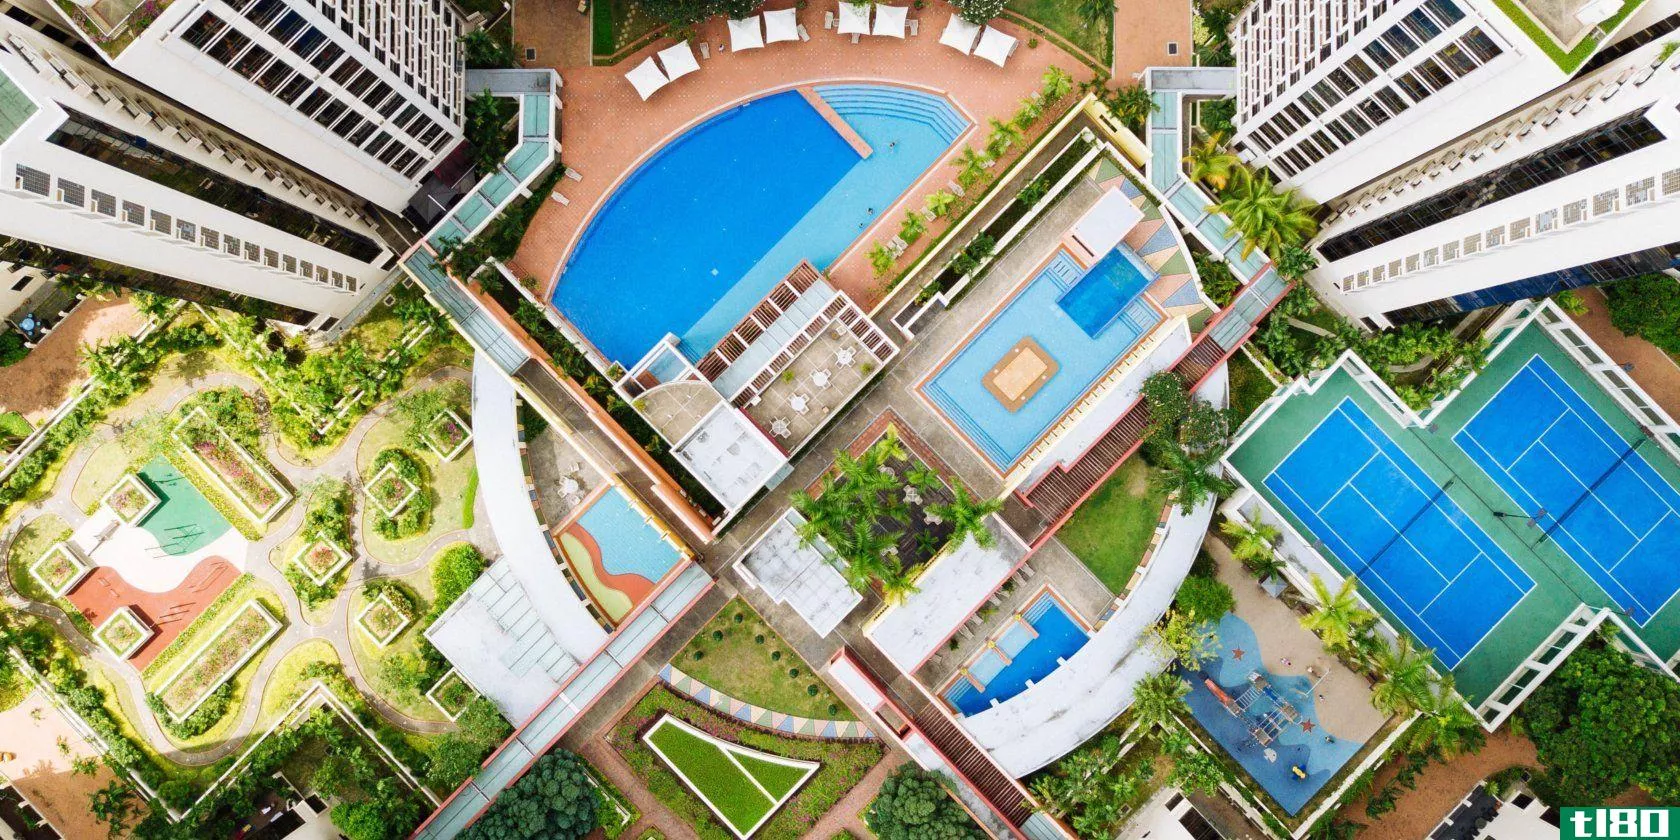 a birds eye view of a collection of swimming pools